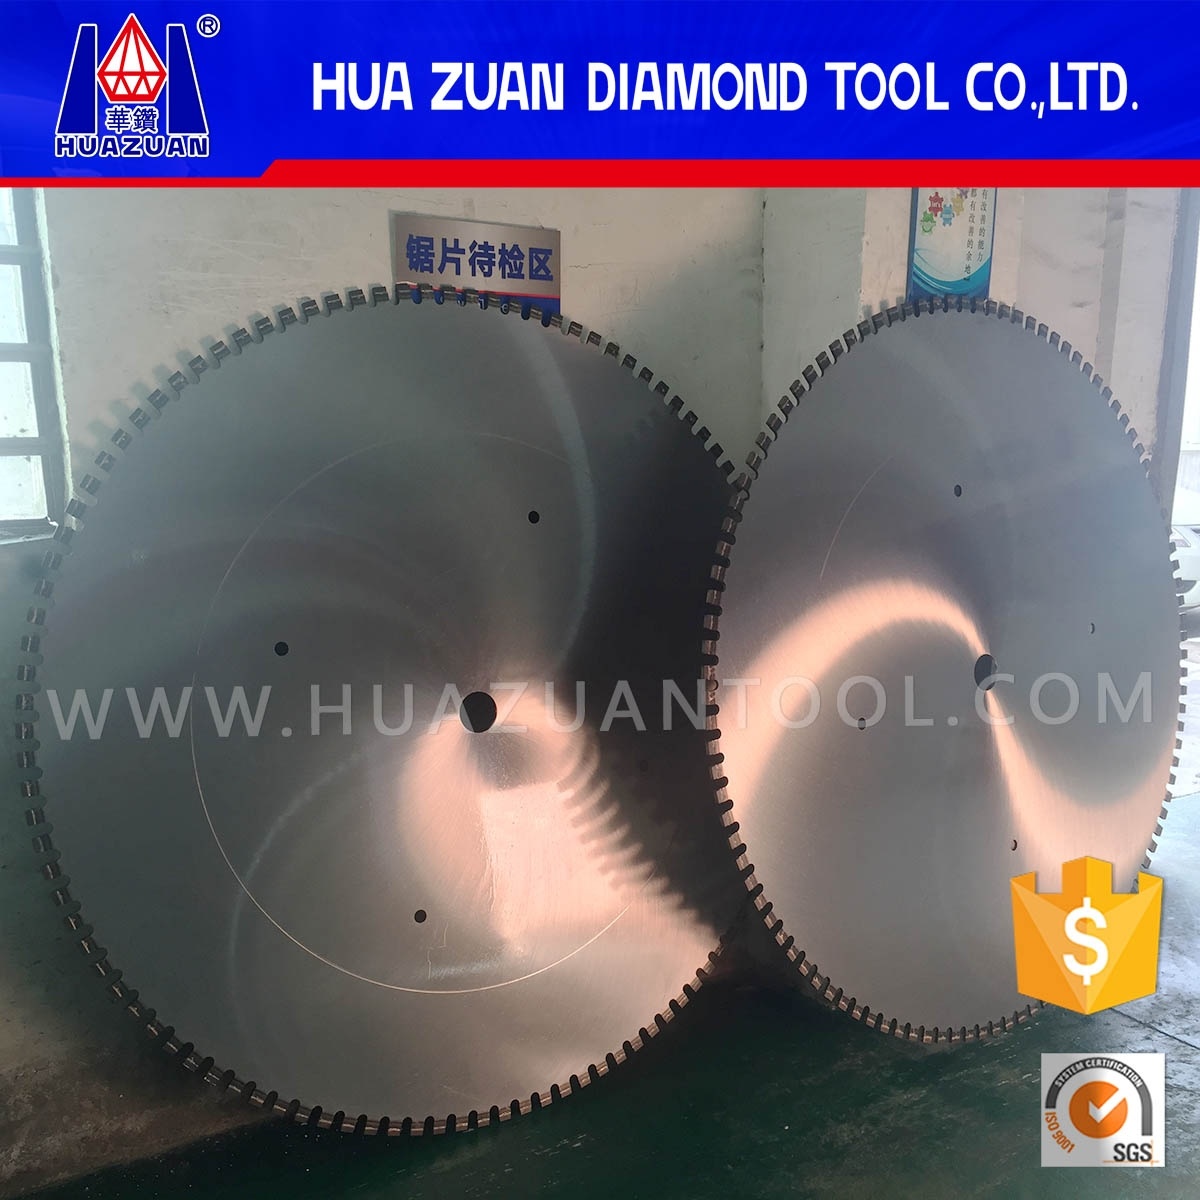 Silver Welding Diamond Saw Blade for Fast Cutting Various Stone